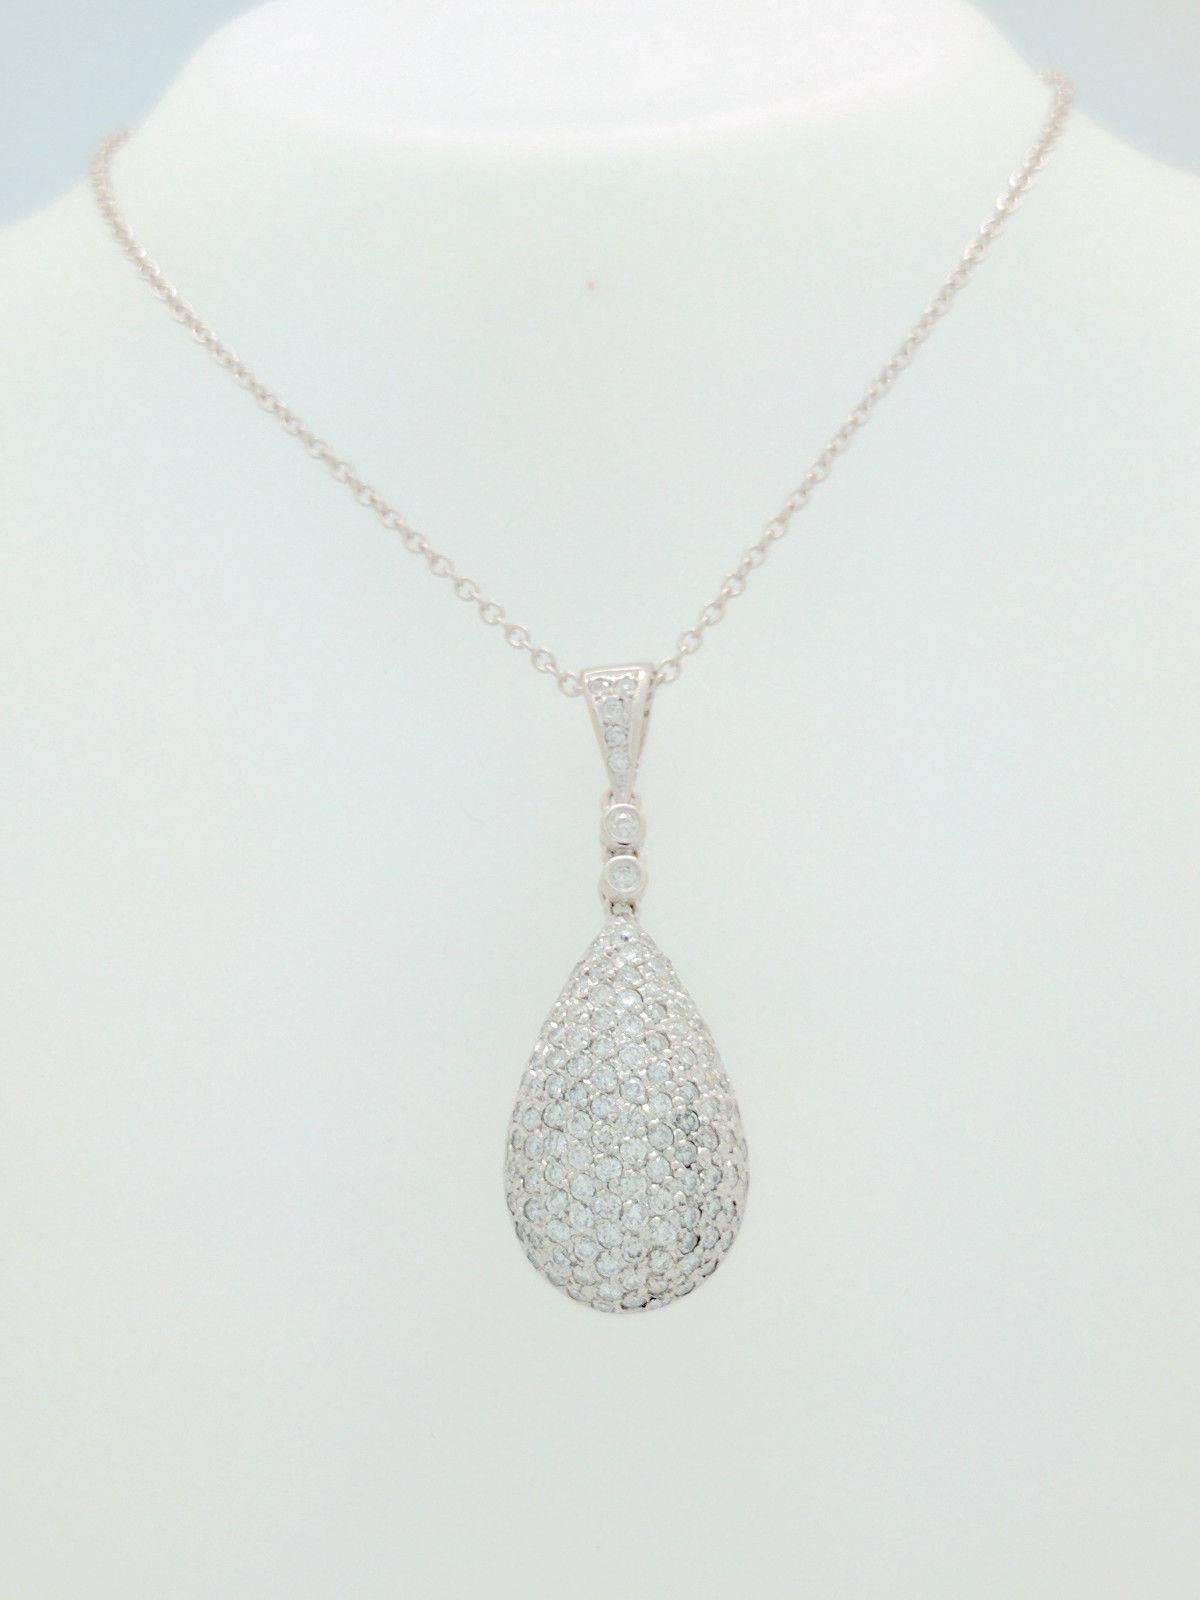 You are viewing a Beautiful Pave Diamond Tear Drop Pendant/Necklace. This is truly a stunning piece that any woman would love to add to their collection.

The pendant is crafted from 14k white gold and weighs 7.5 grams. It features 114 round natural